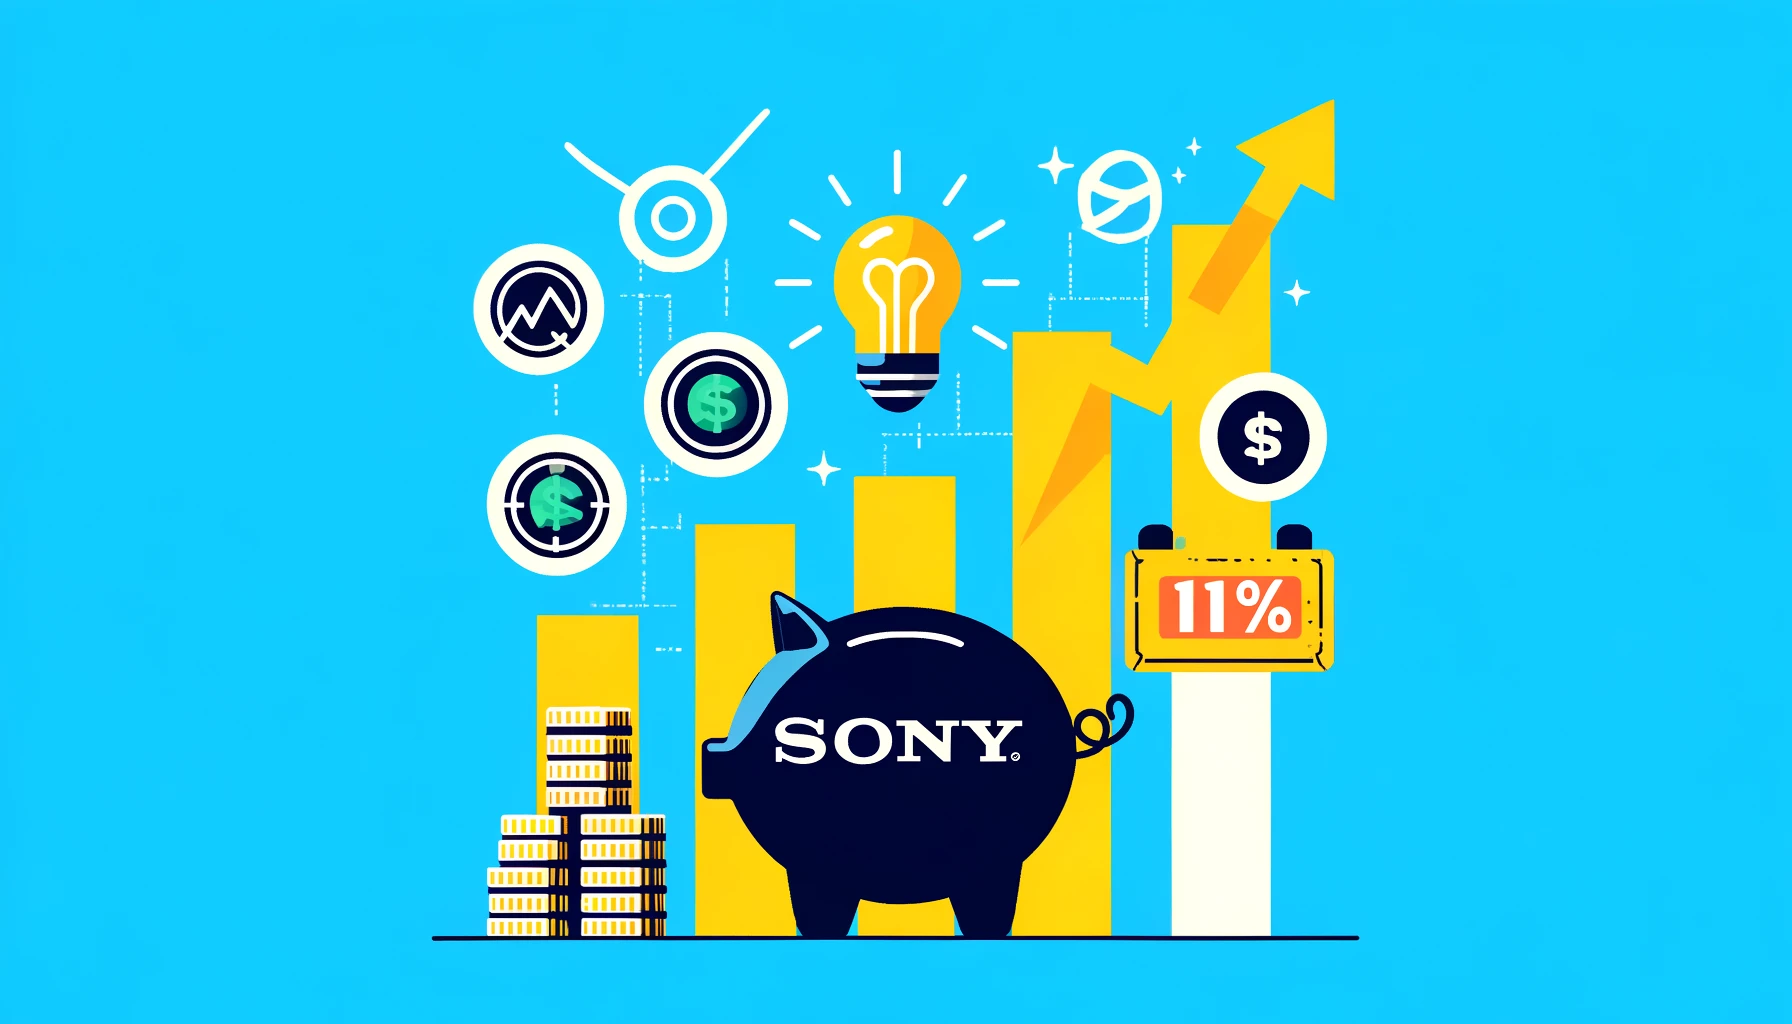 Sony shares soar 12% following buyback, dividend plans, and an improved profit outlook.